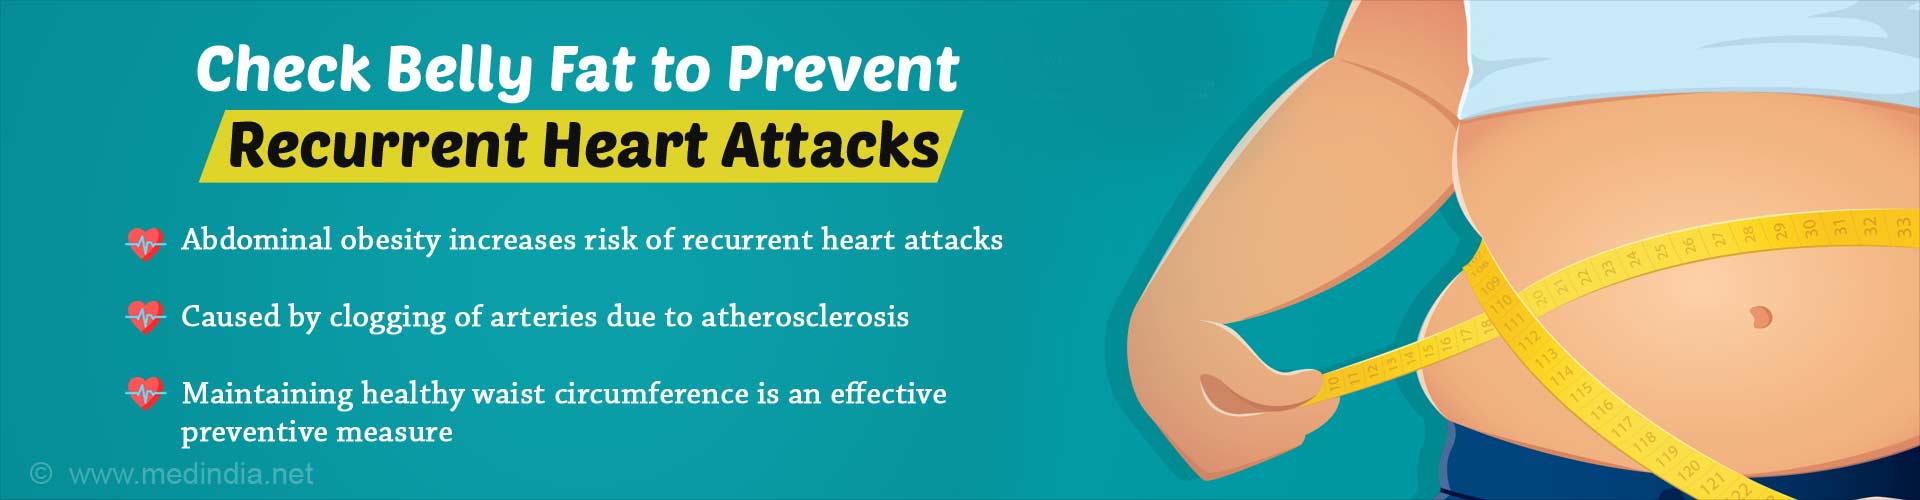 Check belly fat to prevent recurrent heart attacks. Abdominal obesity increases risk of recurrent heart attacks. Caused by clogging of arteries due to atherosclerosis. Maintaining healthy waist circumference is an effective preventive measure.